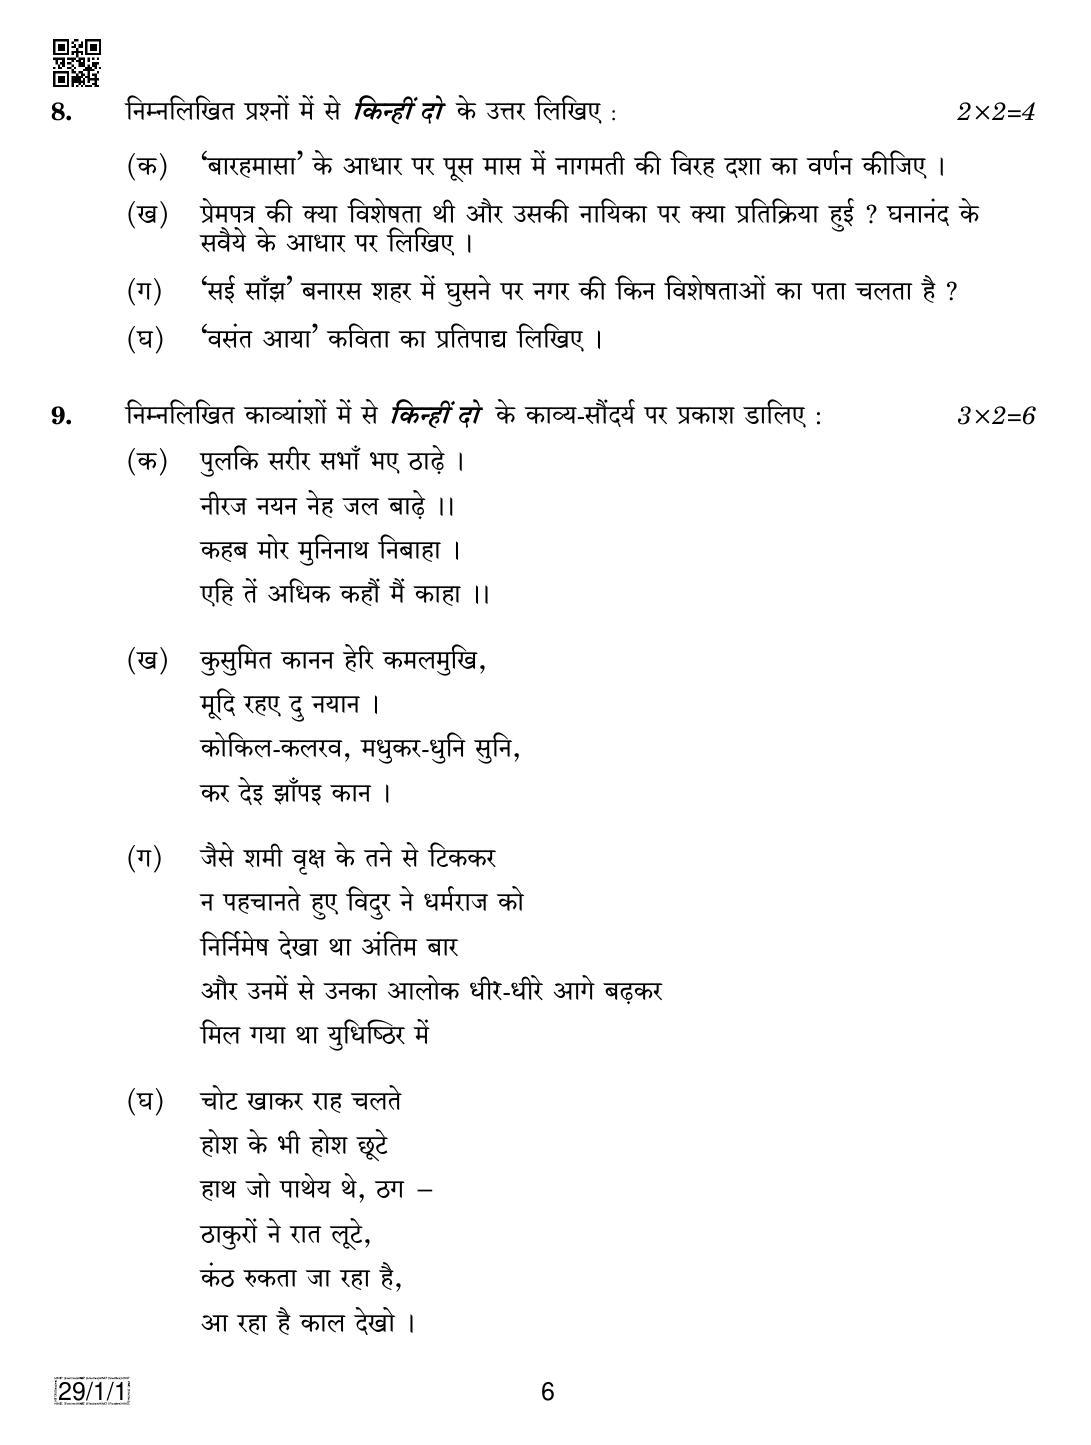 CBSE Class 12 29-1-1 HINDI ELECTIVE 2019 Compartment Question Paper - Page 6